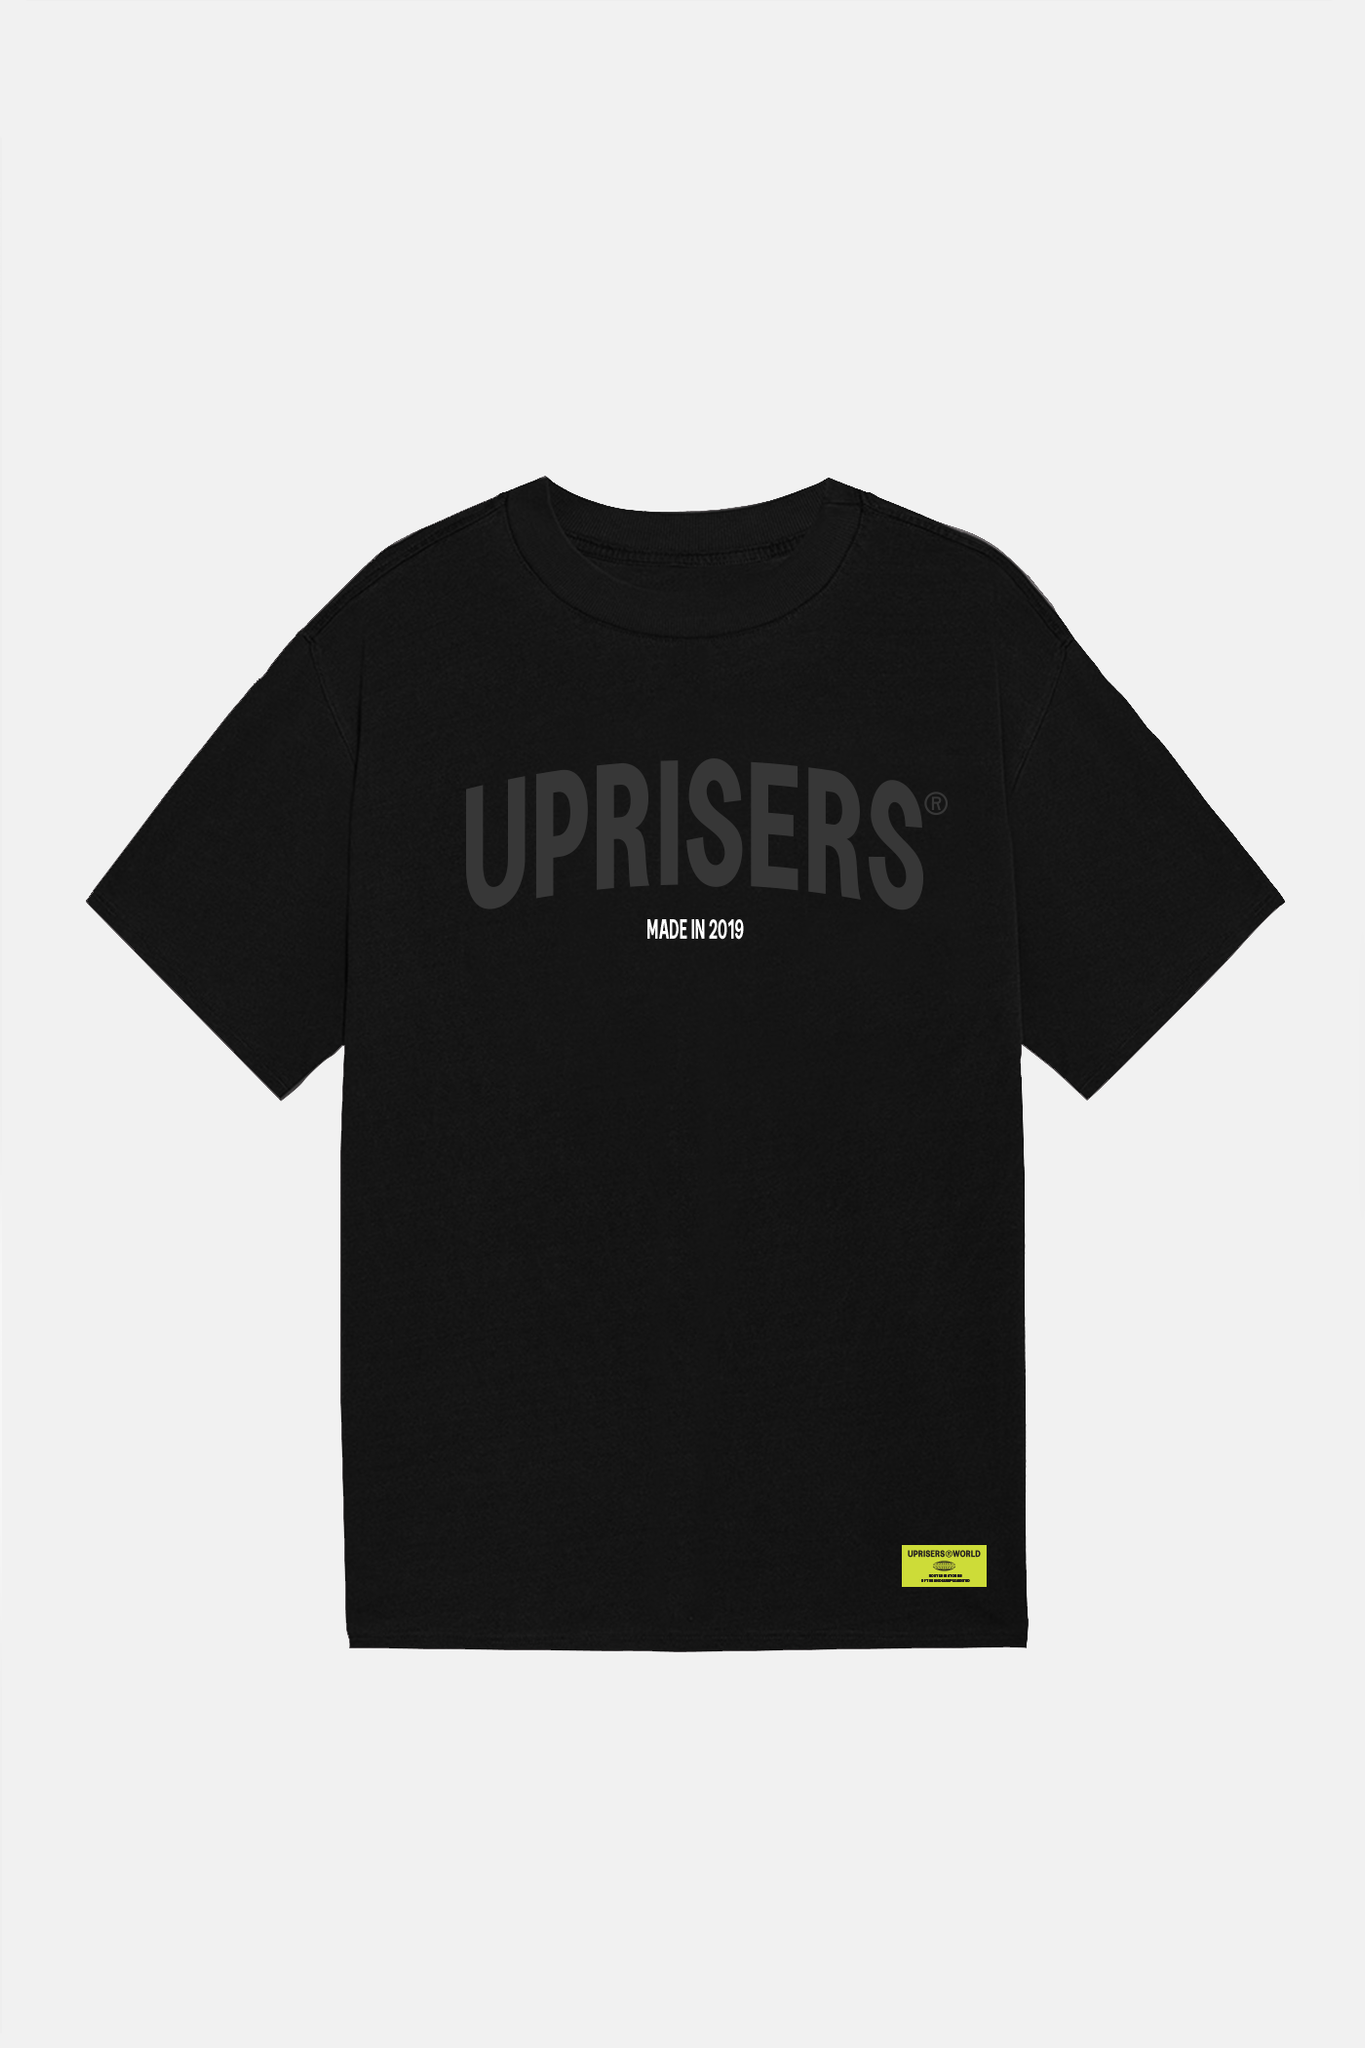 *imperfect* Uprisers.World Statement Tees